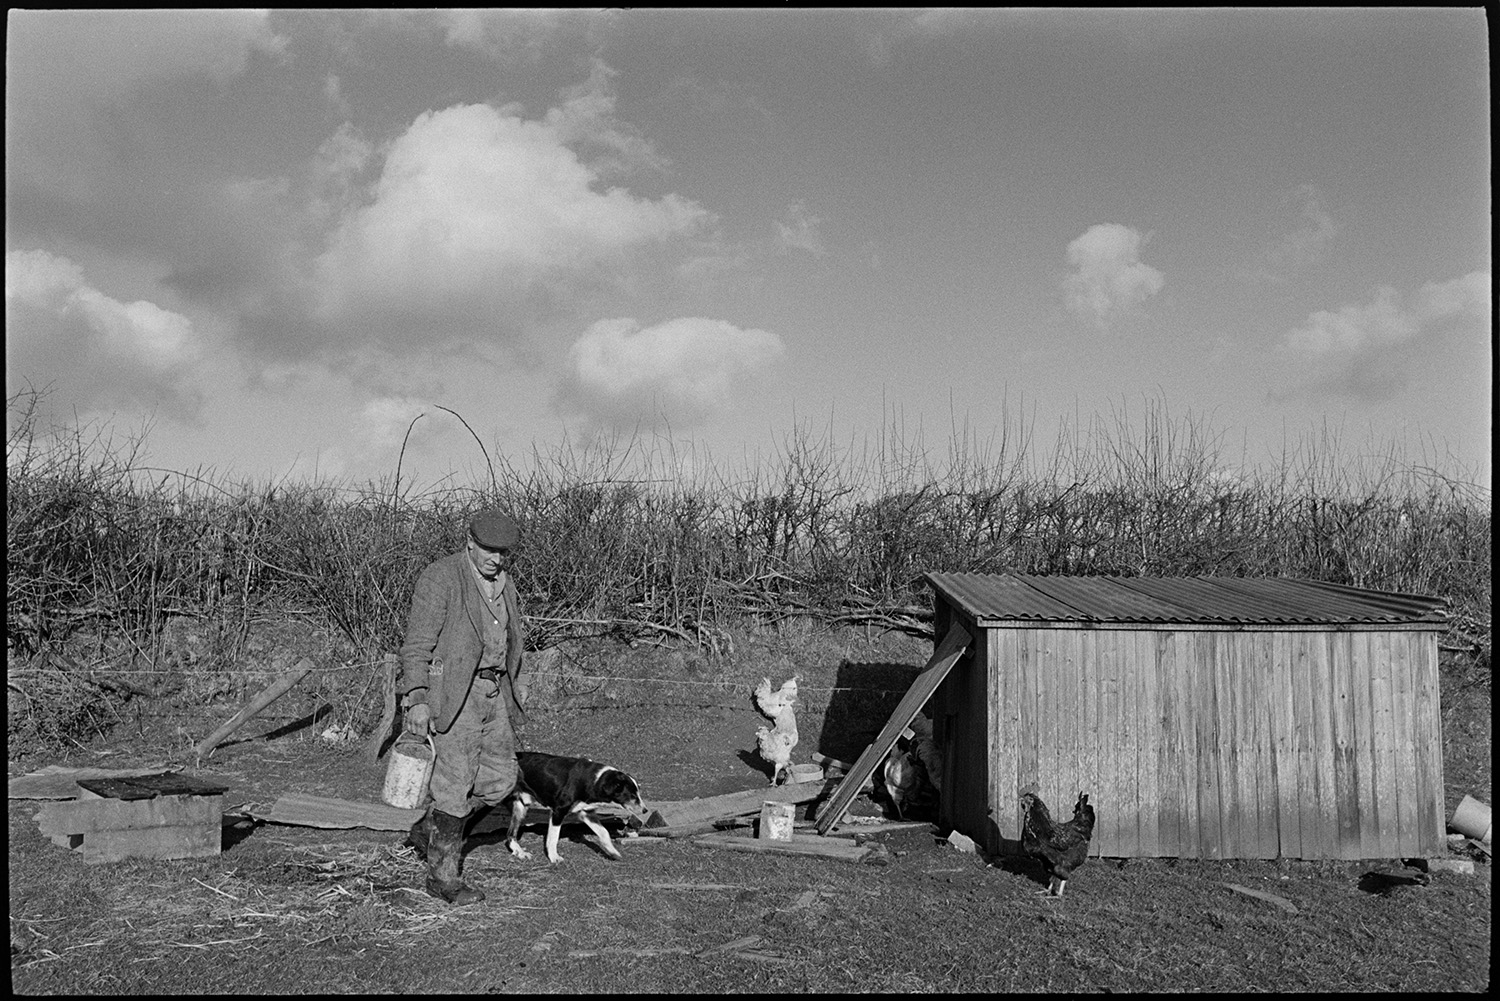 Landscapes with chickens and sheep, strange clouds, farmer.
[George Ayre feeding chickens in a field at Ashwell Farm, Dolton. They are gathered around a wooden coop by a hedge. A dog is with him and clouds can be seen in the sky above.]